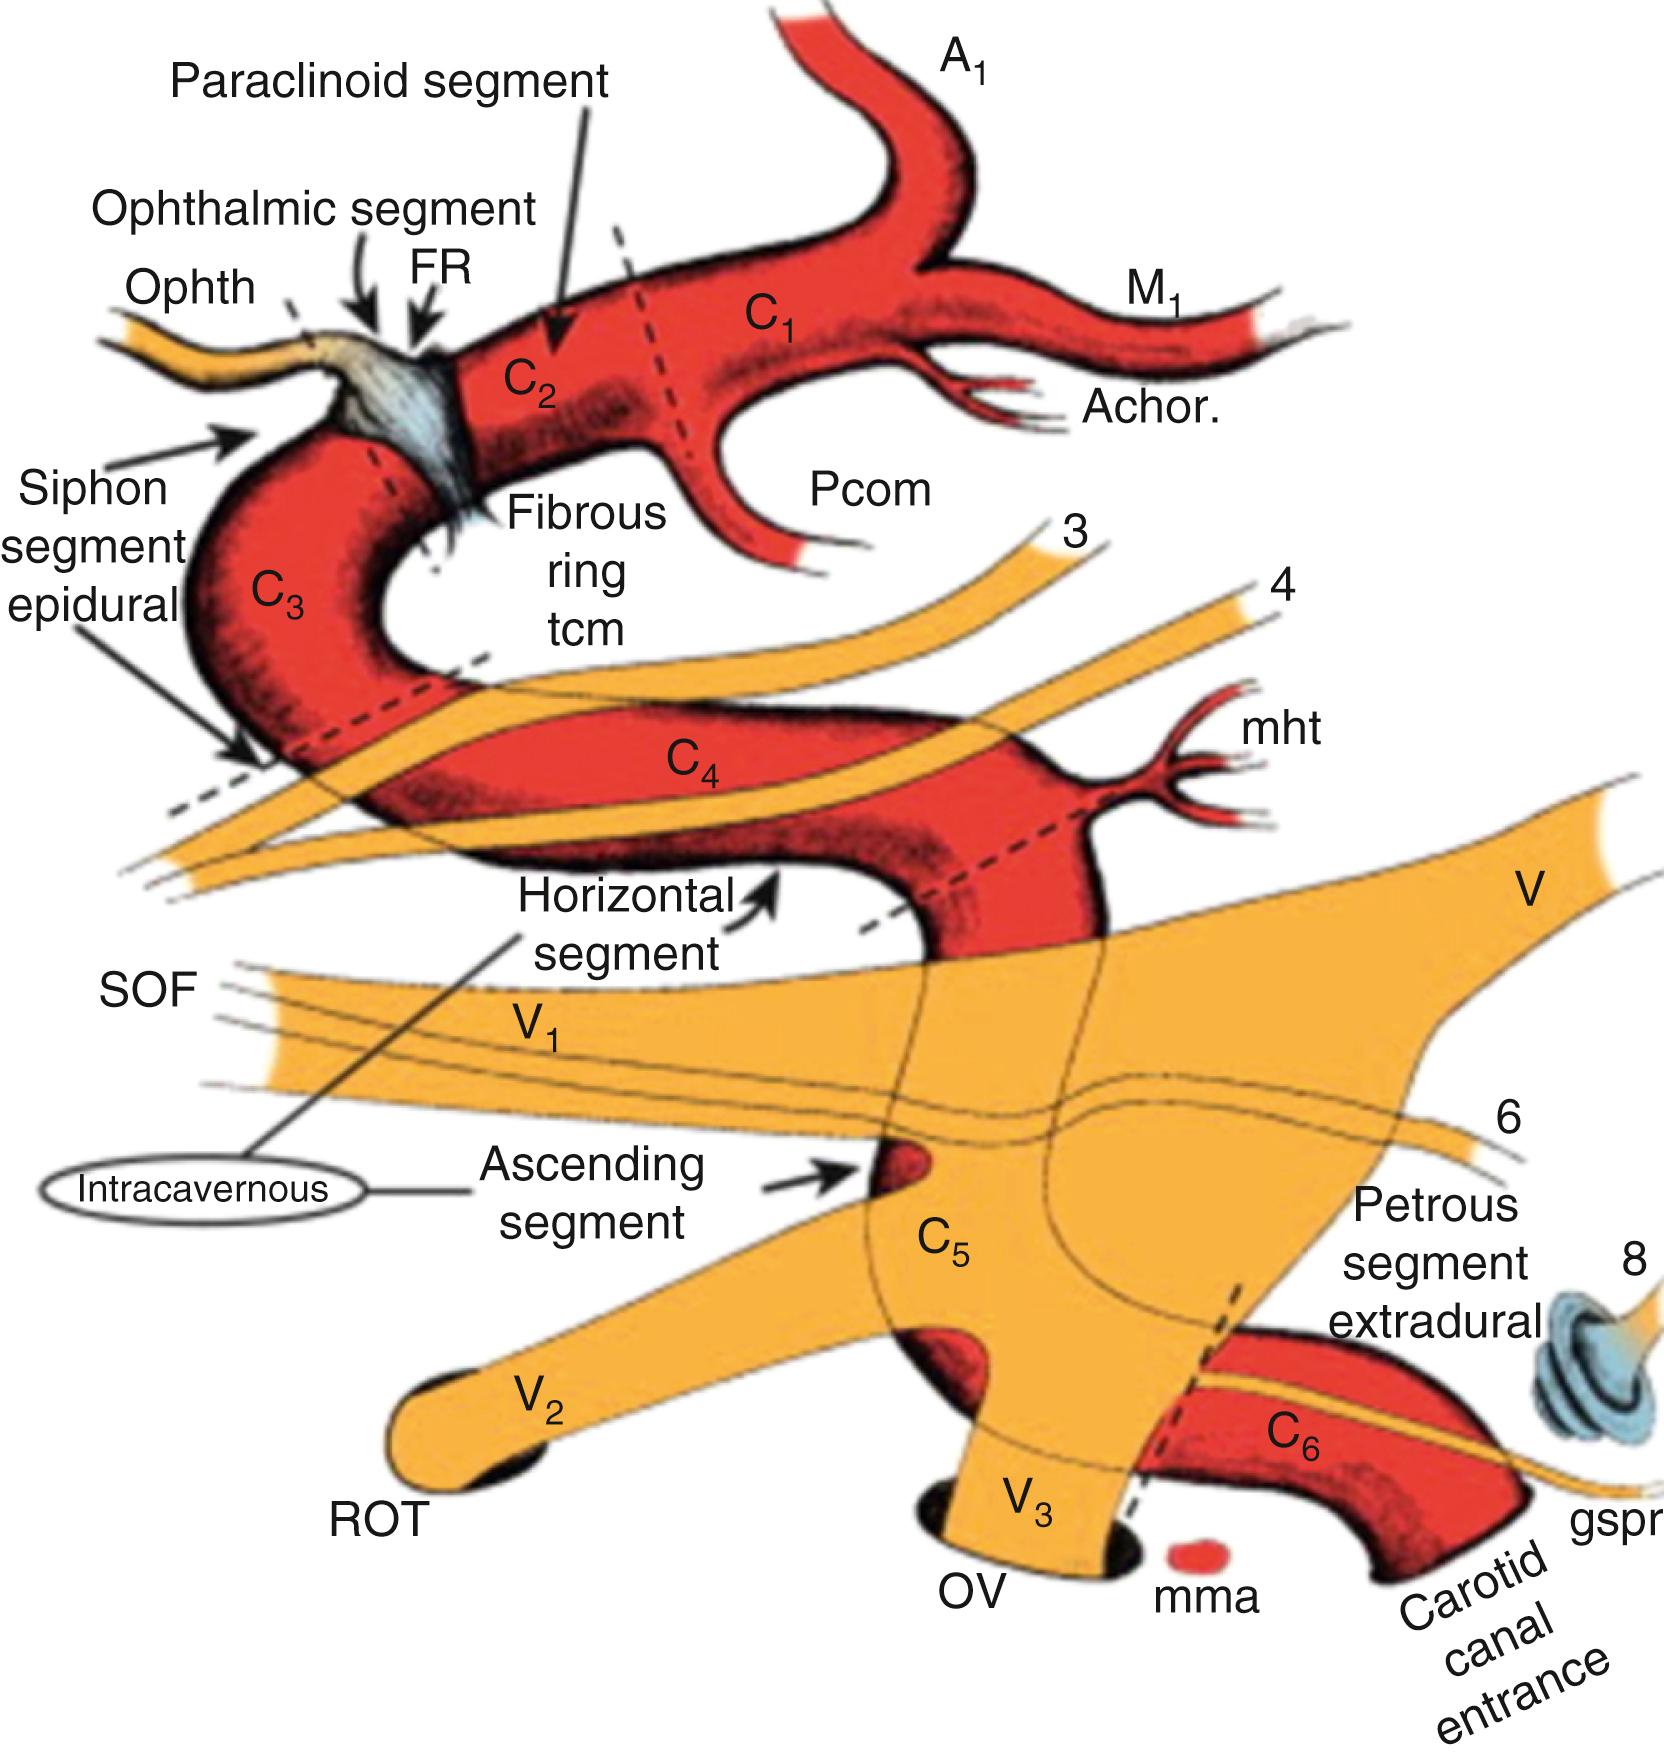 FIGURE 12.6, Cavernous anatomy: Drawing of the neurovascular structures traversing within the cavernous sinus.